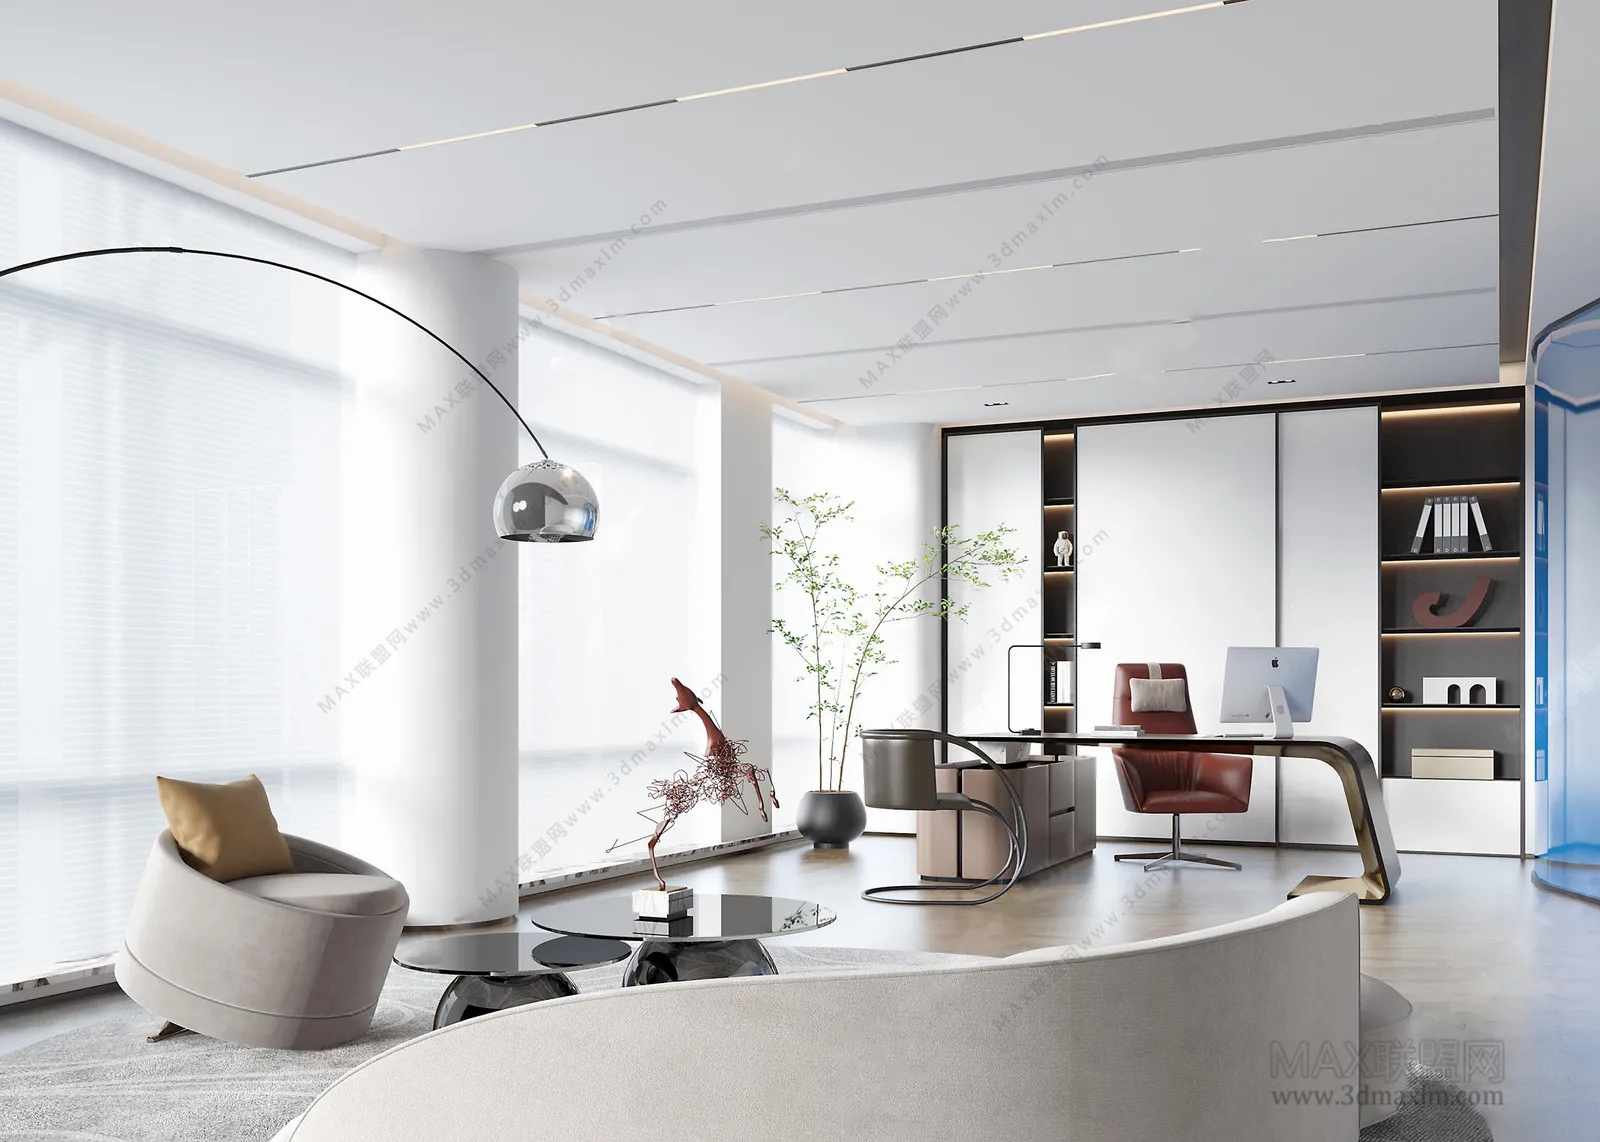 3D OFFICE INTERIOR (VRAY) – MANAGER ROOM 3D SCENES – 010